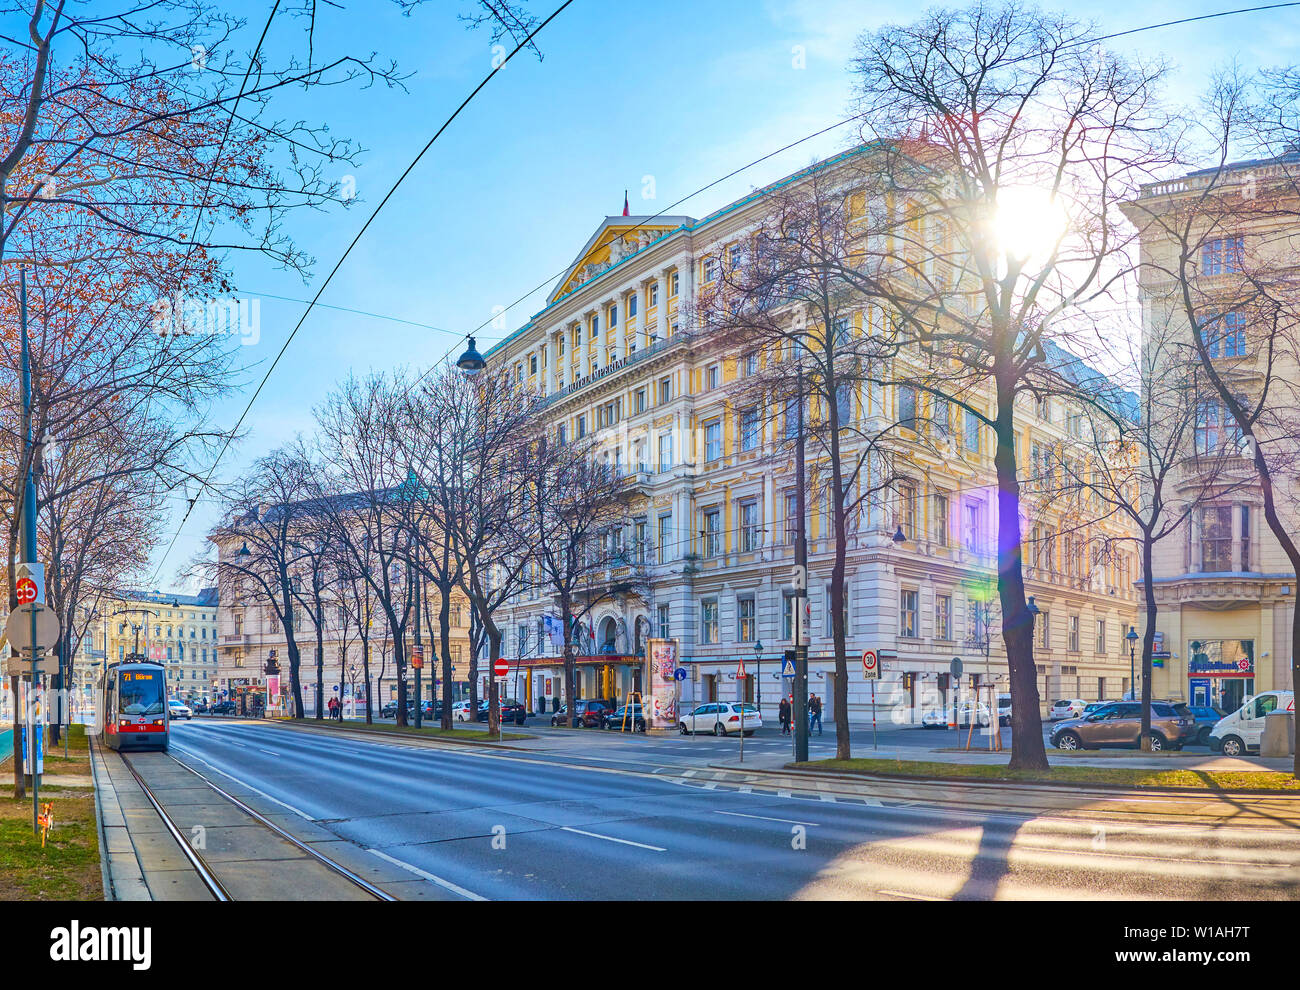 VIENNA, AUSTRIA - FEBRUARY 18, 2019: The beautiful building of luxury Hotel Imperial in Neo-Renaissance style located on Ringstrasse, on February 18 i Stock Photo